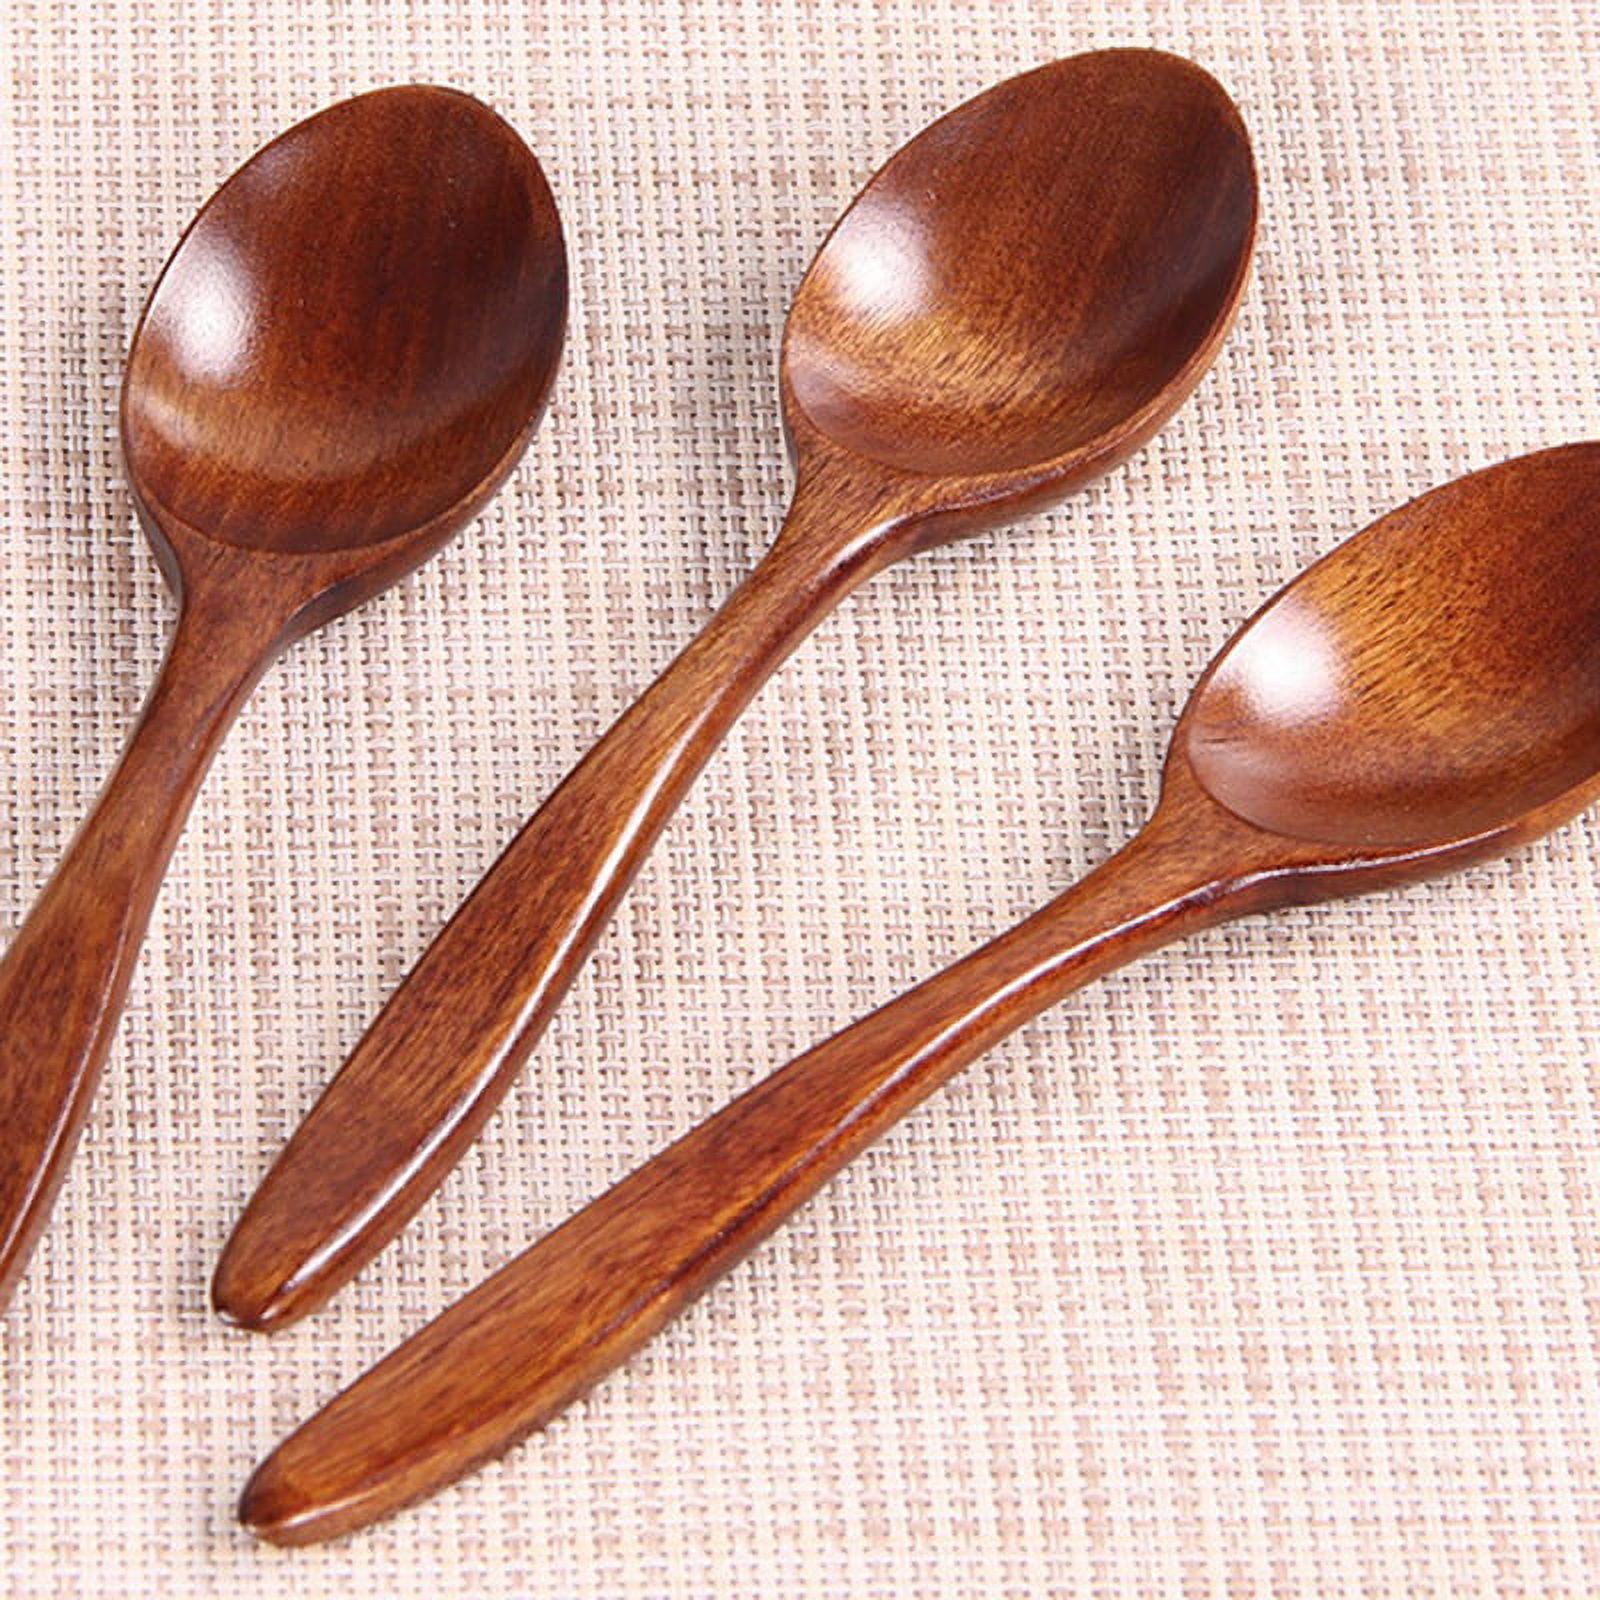 Small Wooden Spoons, Set of 3 – Some September